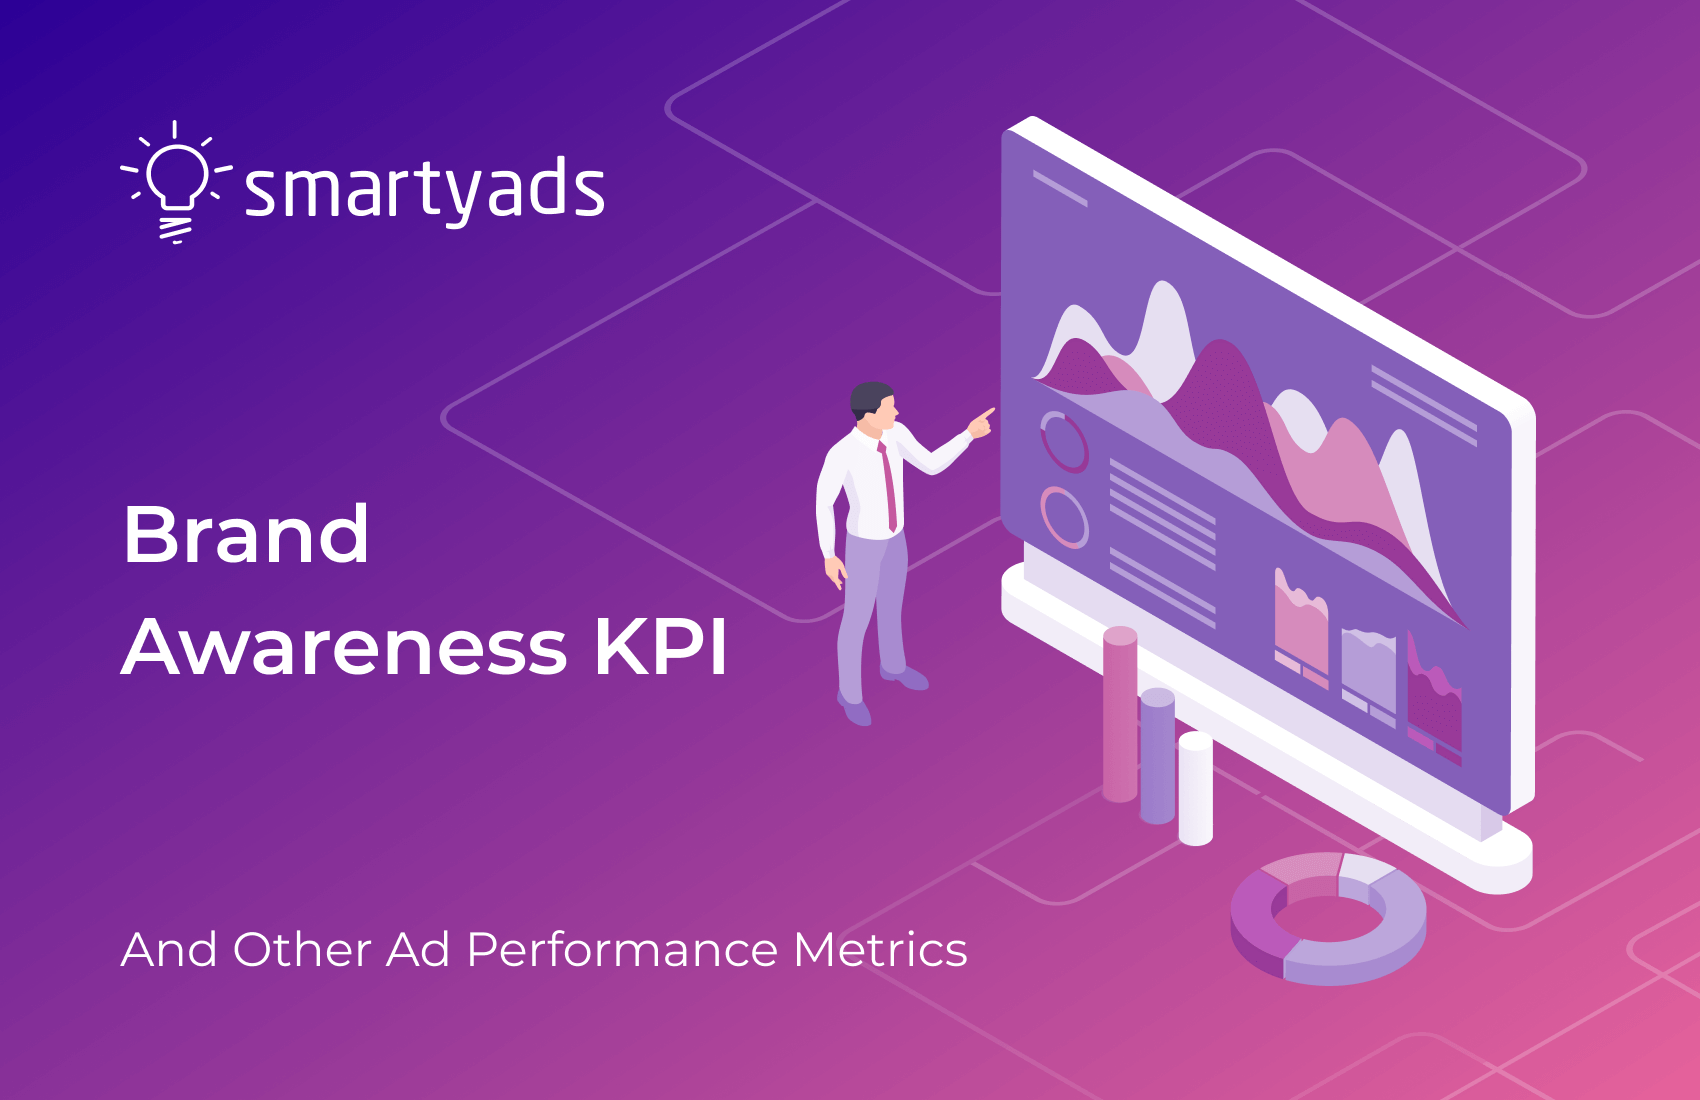 Brand Awareness KPIs. How to Measure and Optimize Campaigns Towards Them